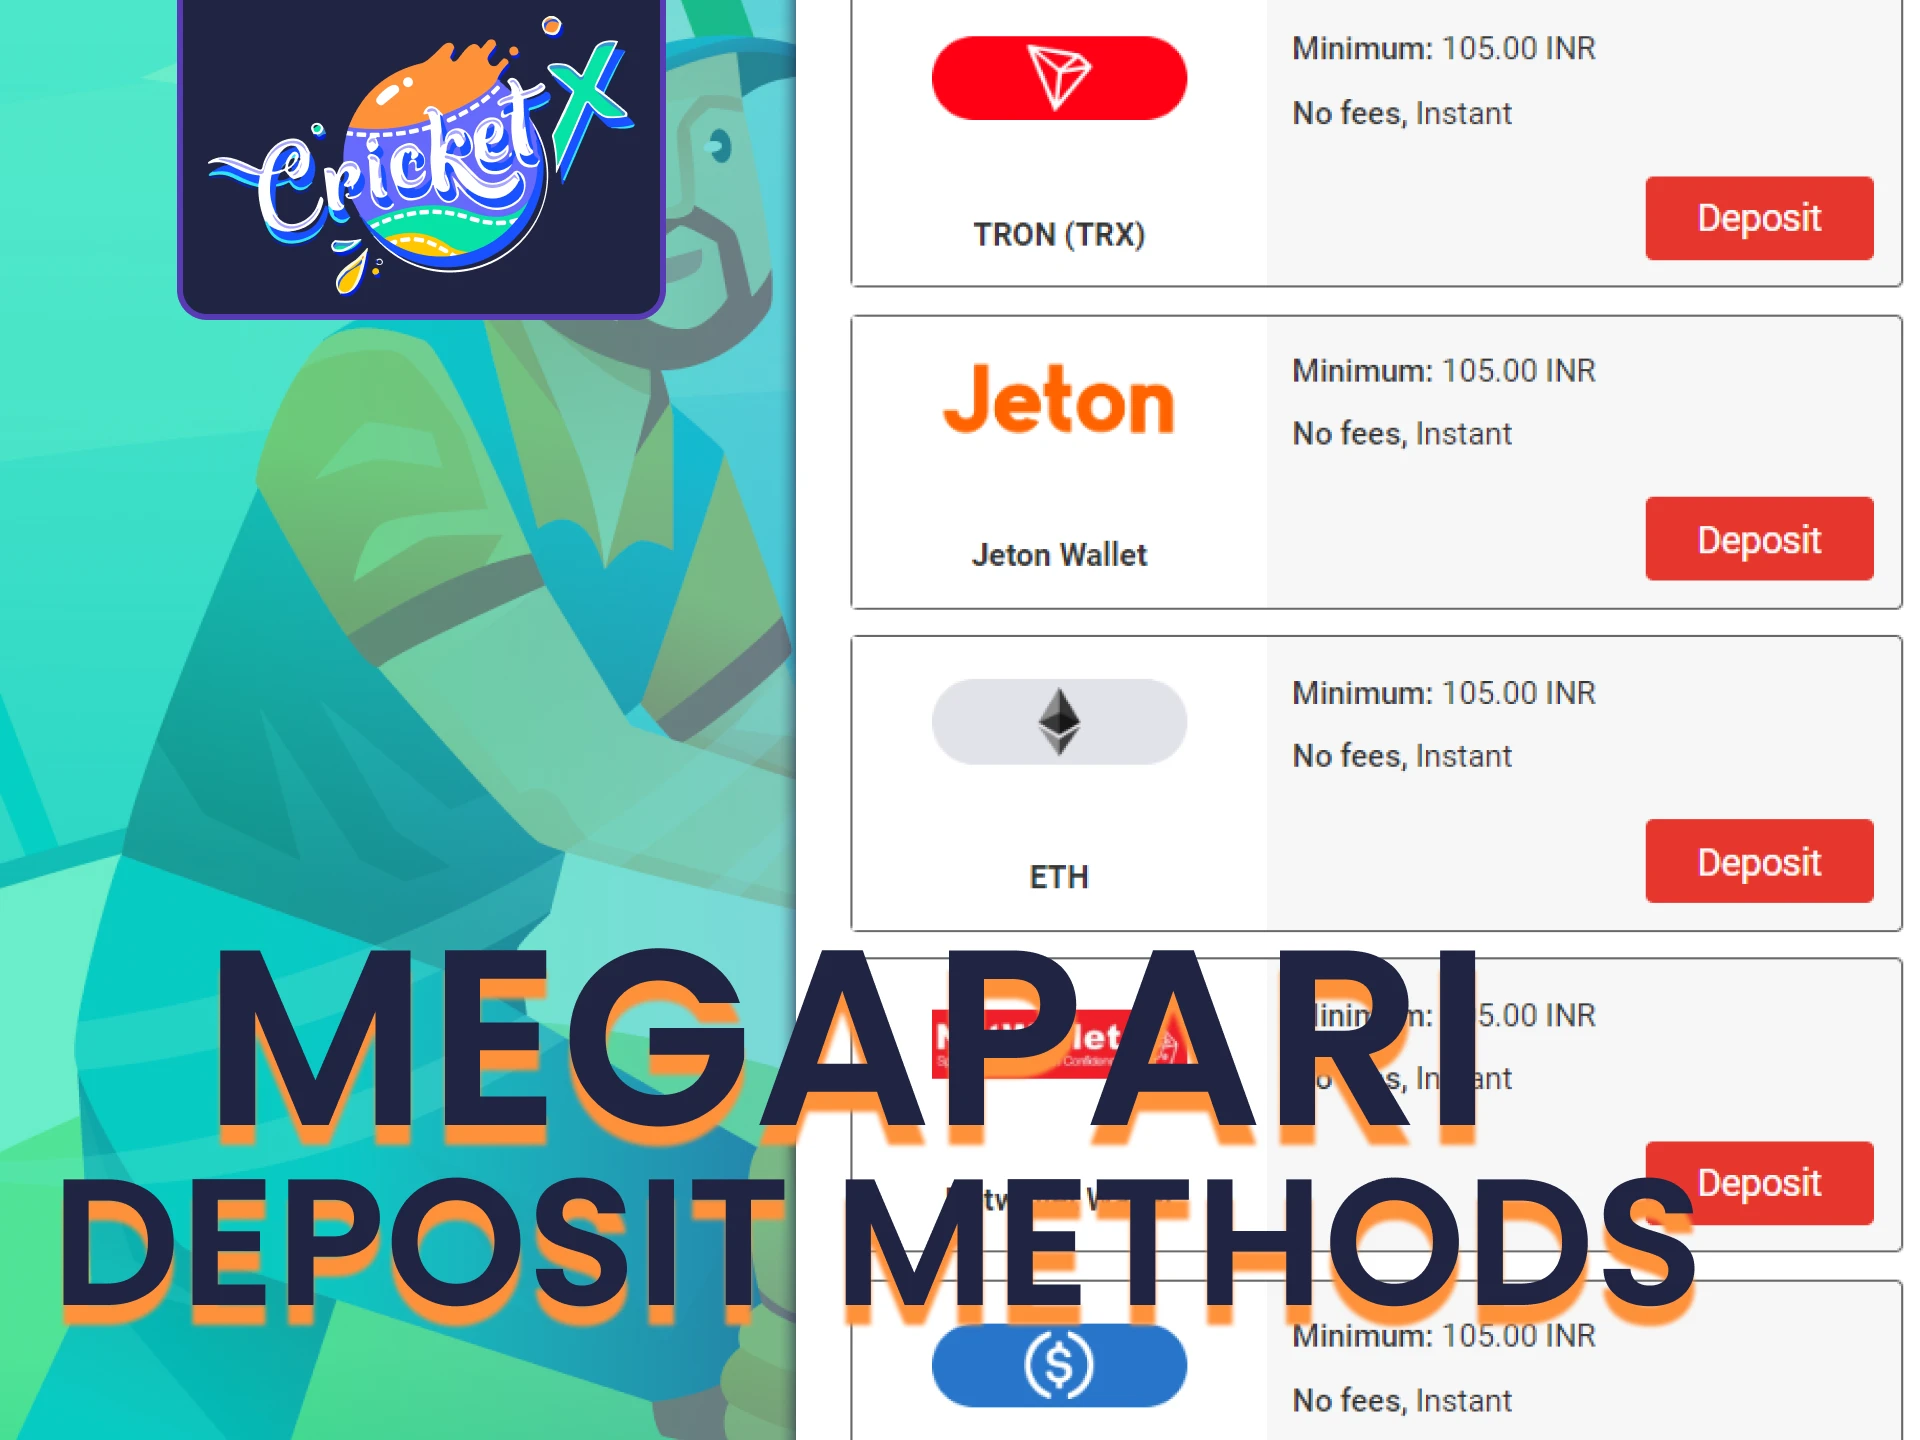 Top up your deposit on Megapari to play Cricket X.